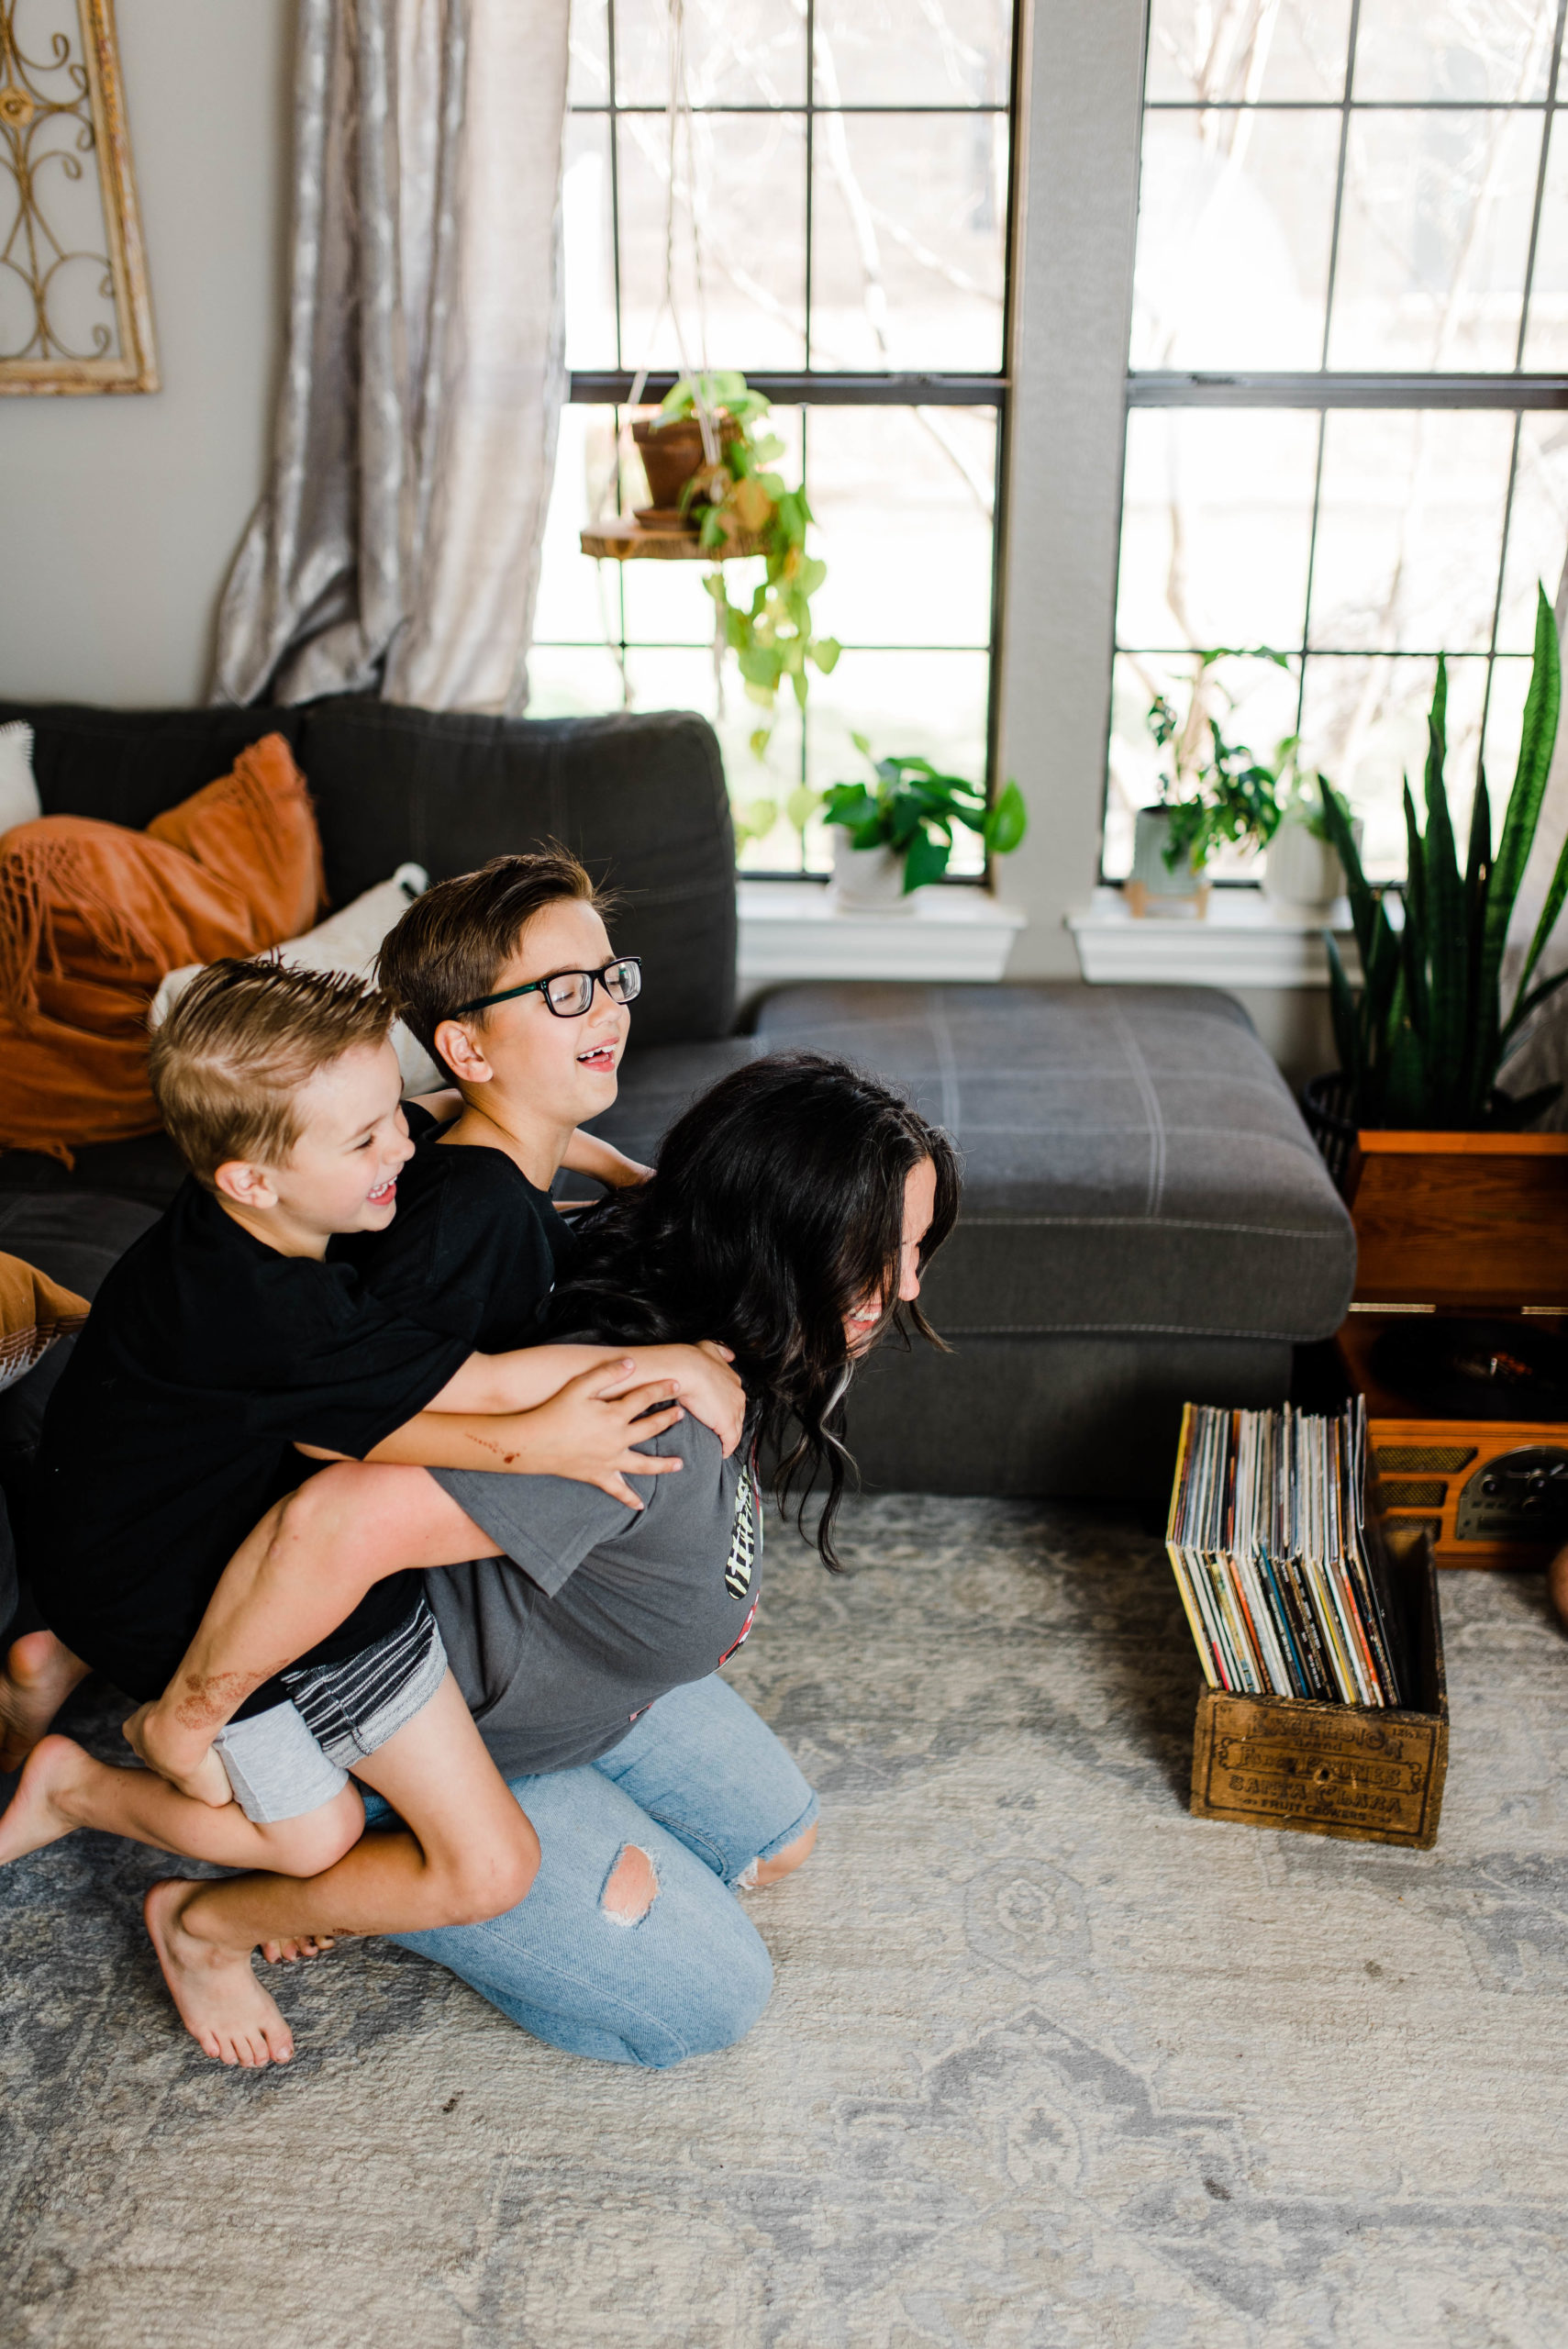 Tips for a Working Mom in Photography for Setting Boundaries | Education for Family Photographer Businesses | Dallas Area Family Photographer | Brittnie Renee Photo